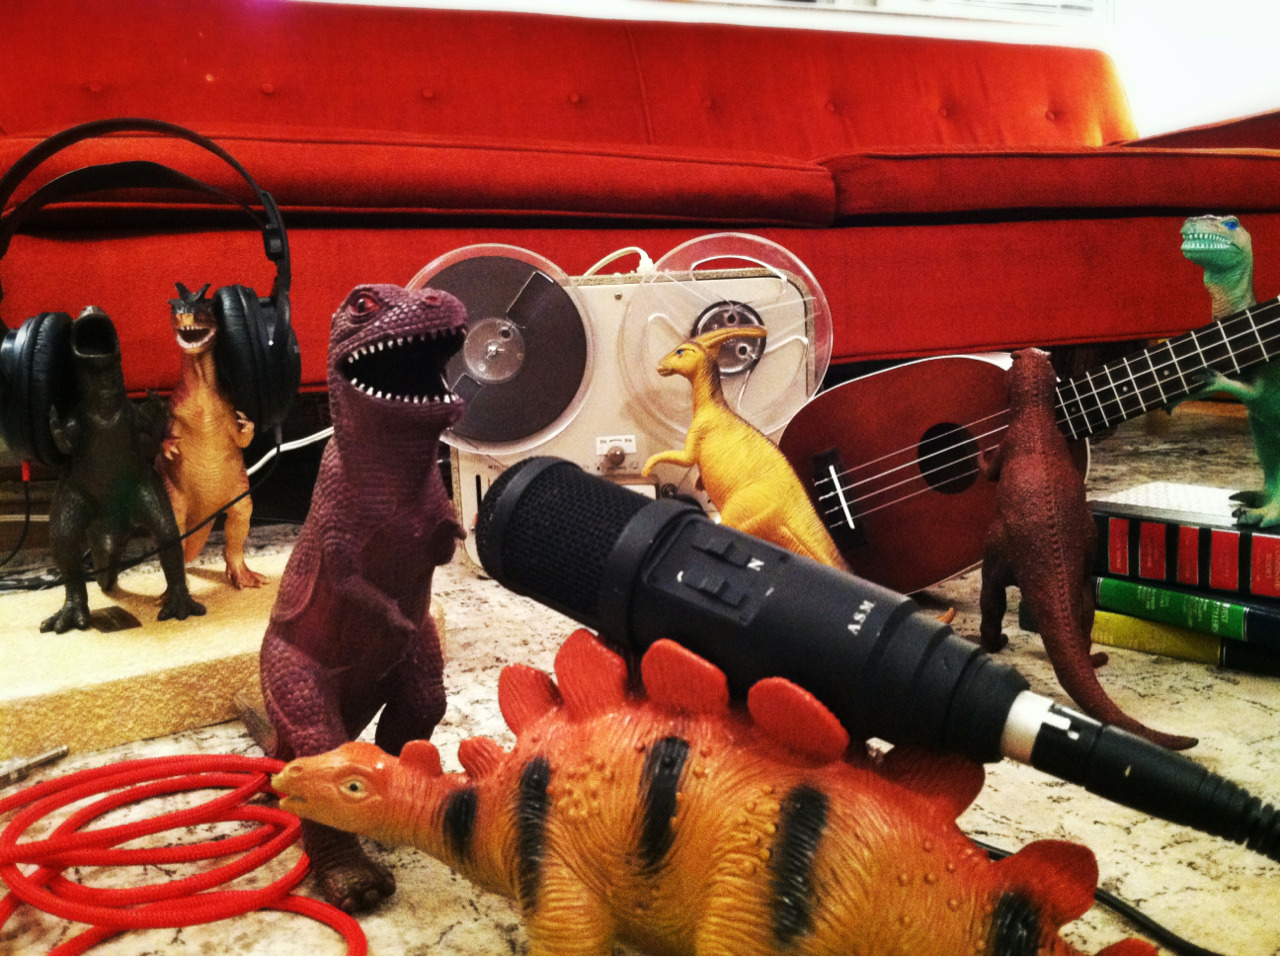 #Dinovember Day 18: Late night recording session. I wonder what&#8217;s on the tape&#8230;?